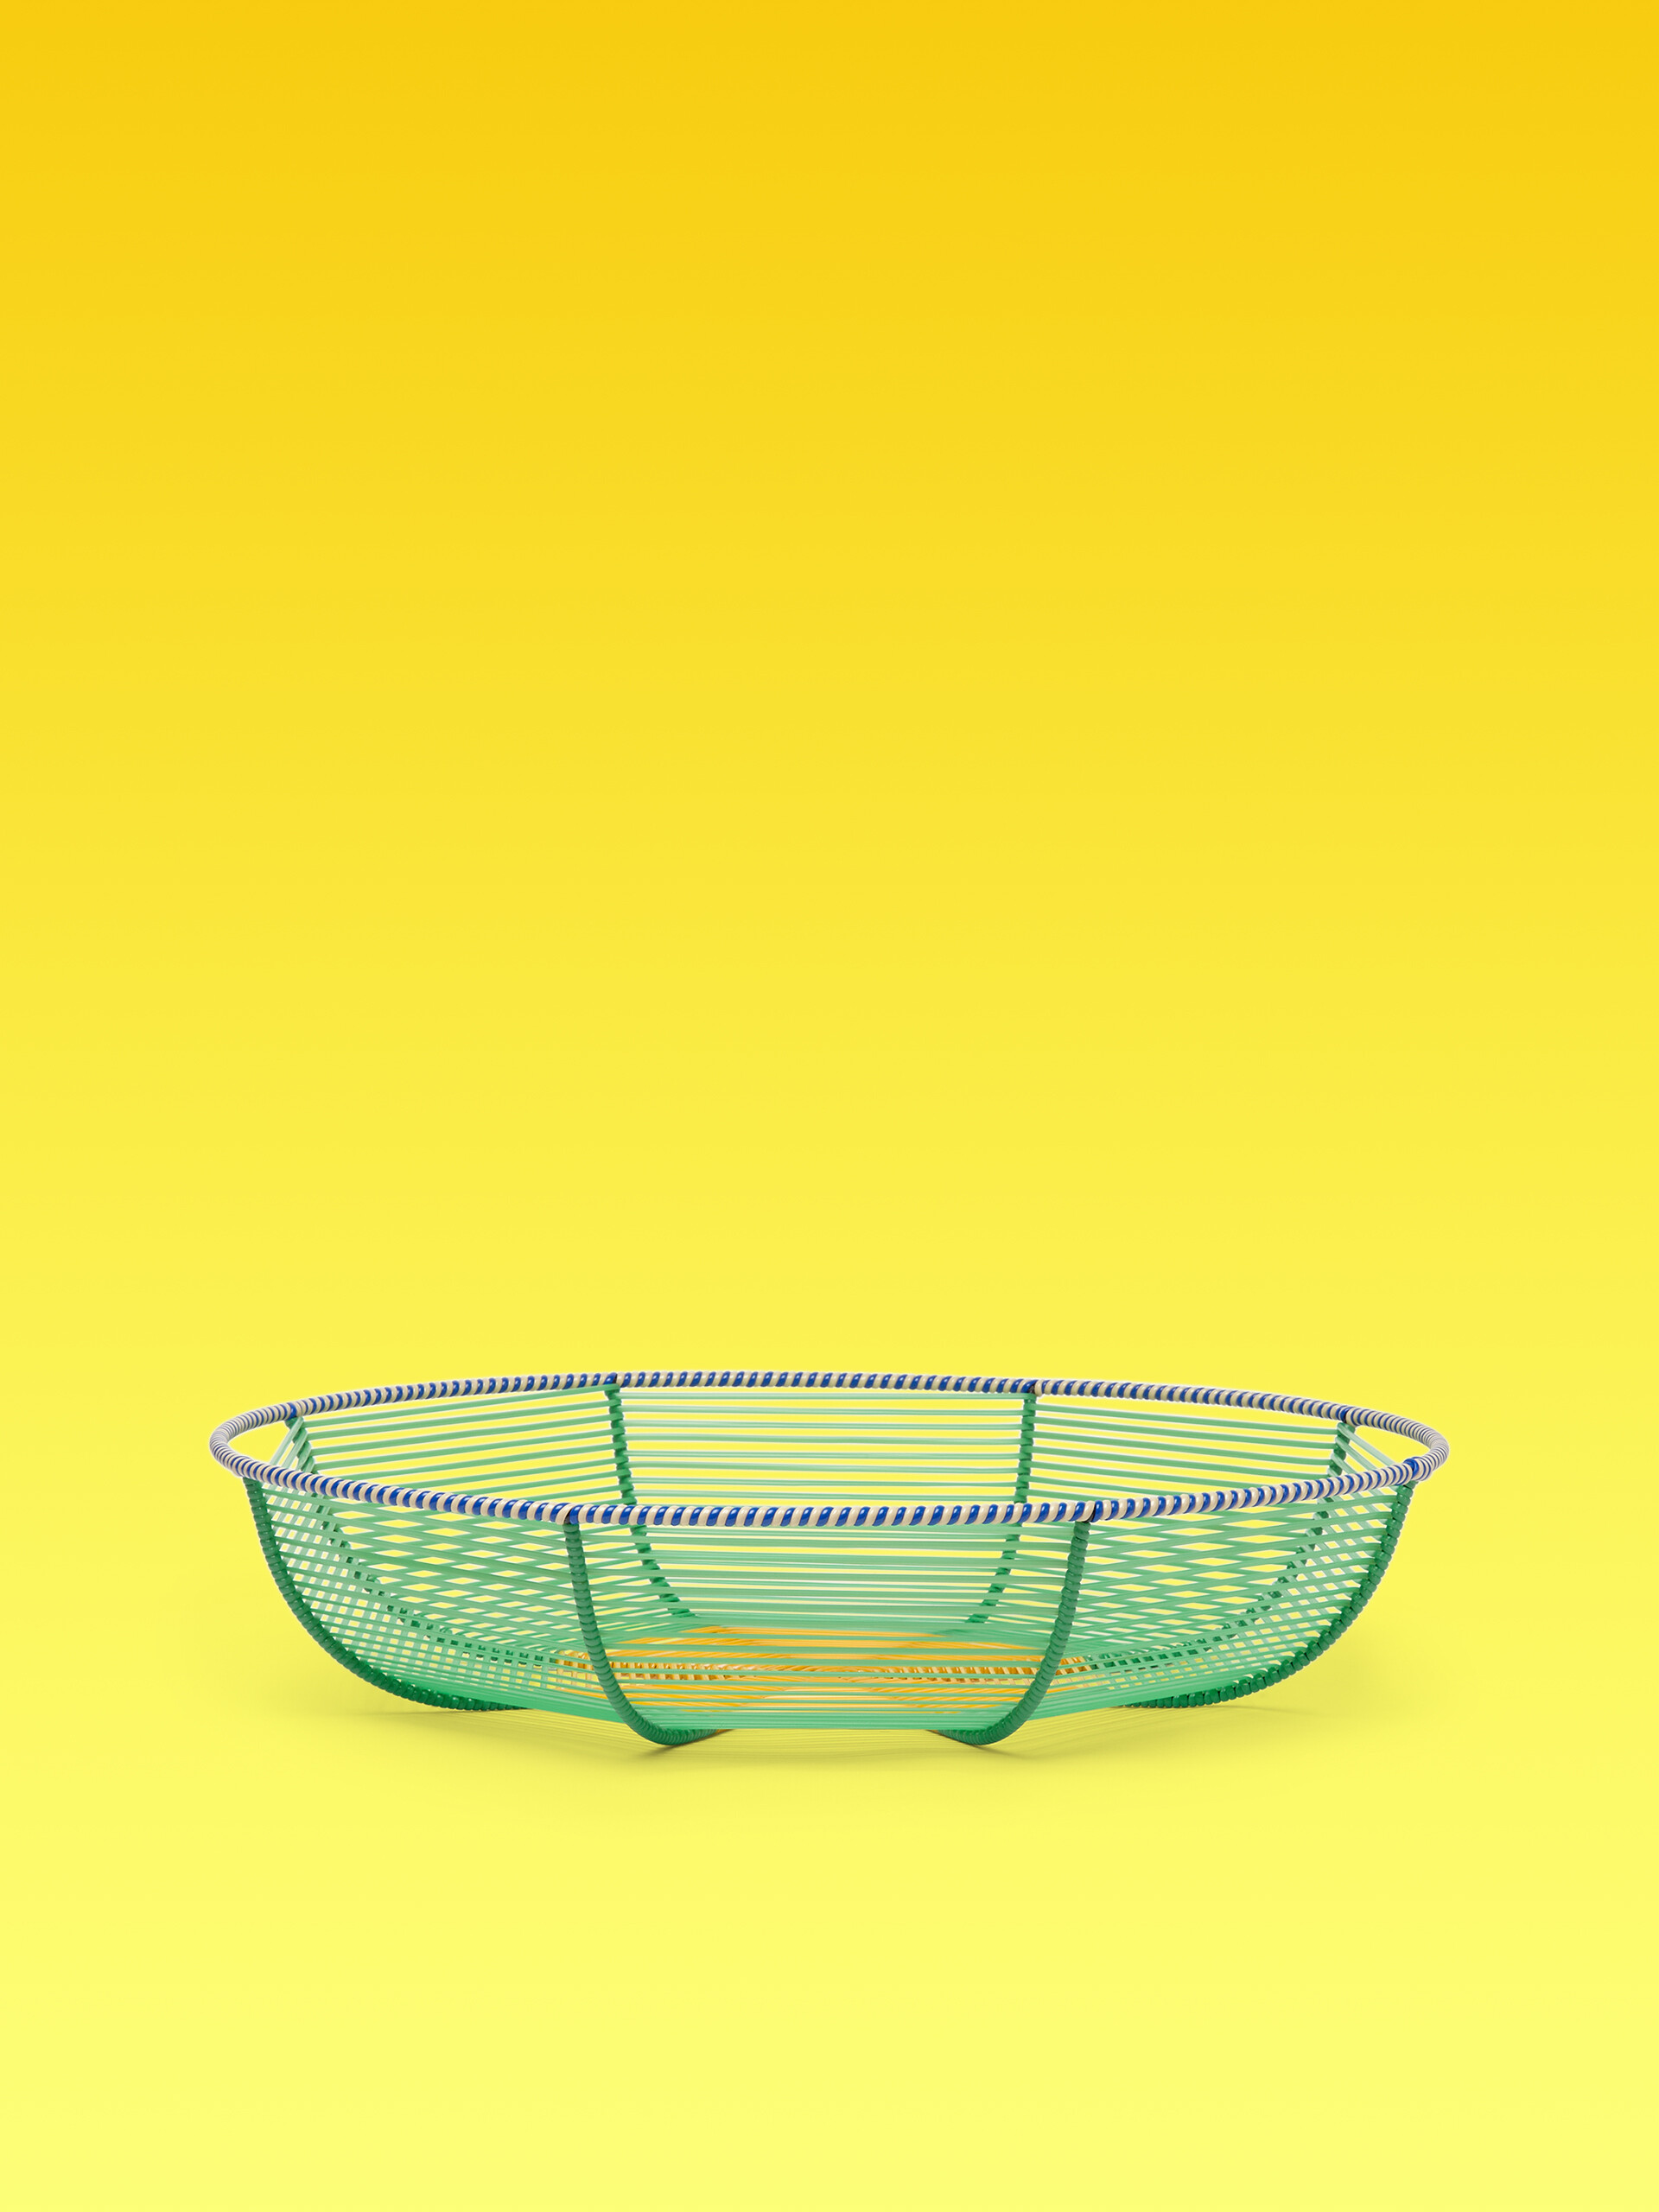 MARNI MARKET iron circular large fruit holder with green PVC - Home Accessories - Image 1